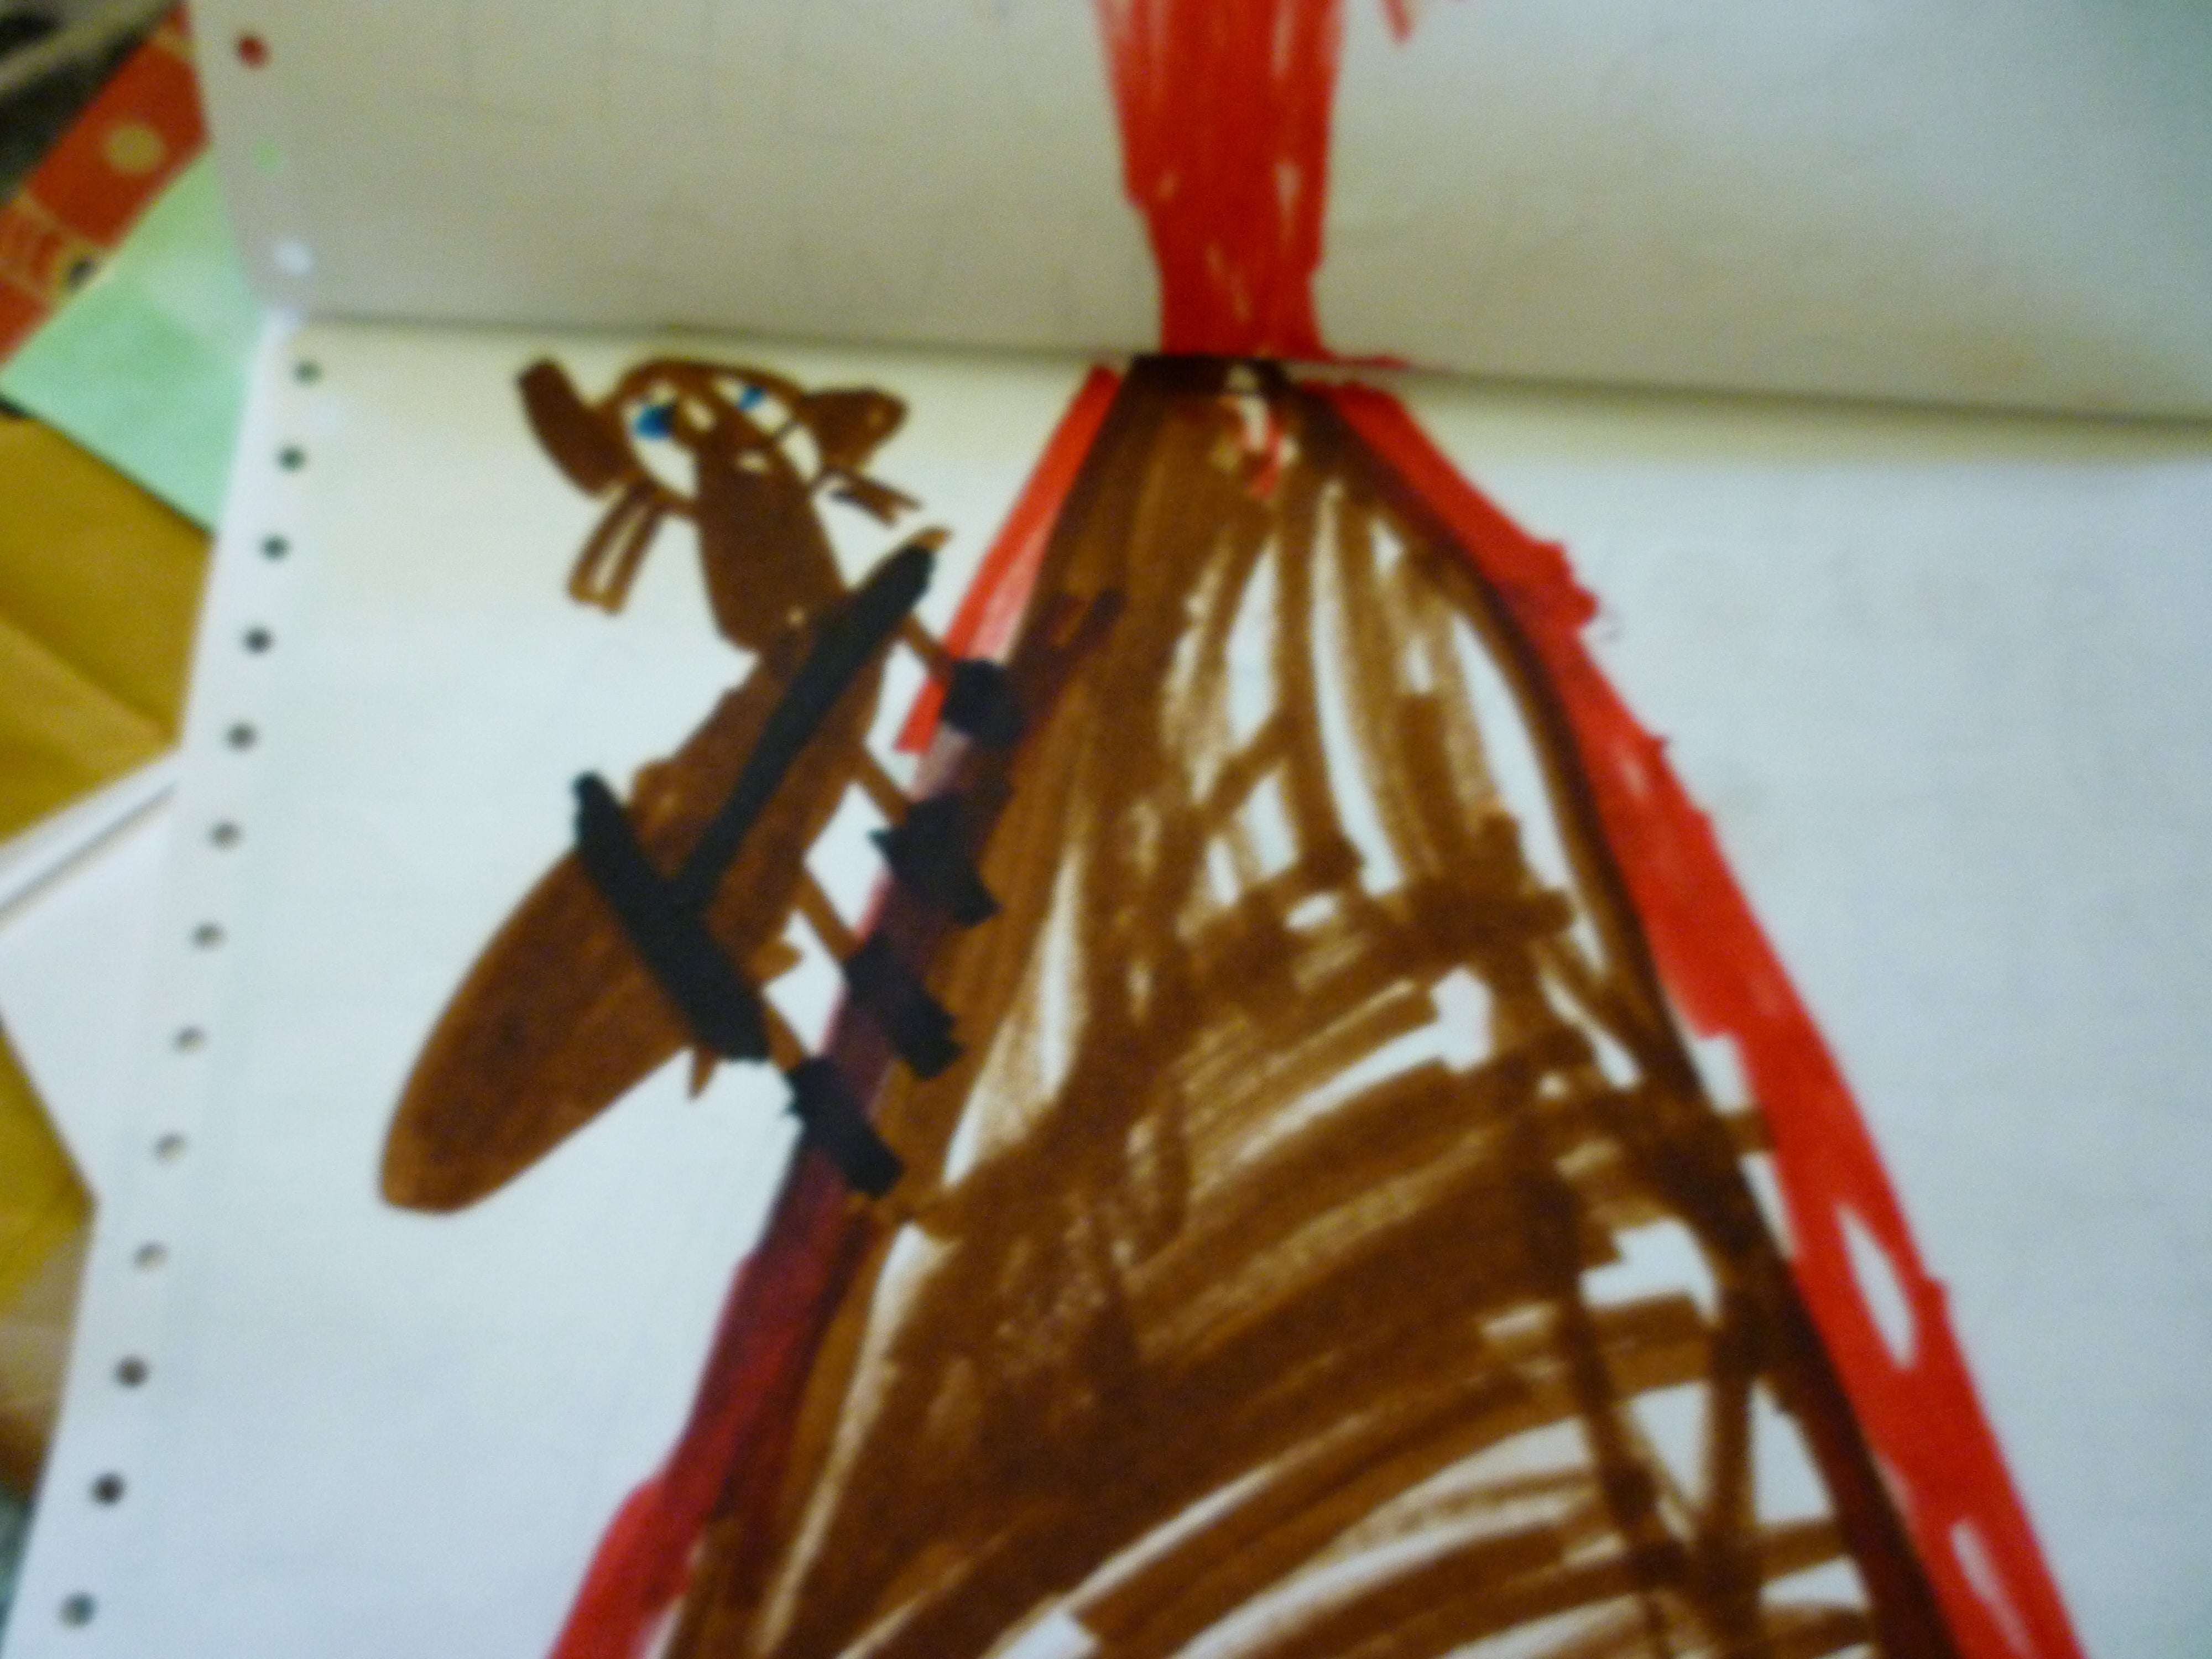 A close up of the dog in the child's drawing